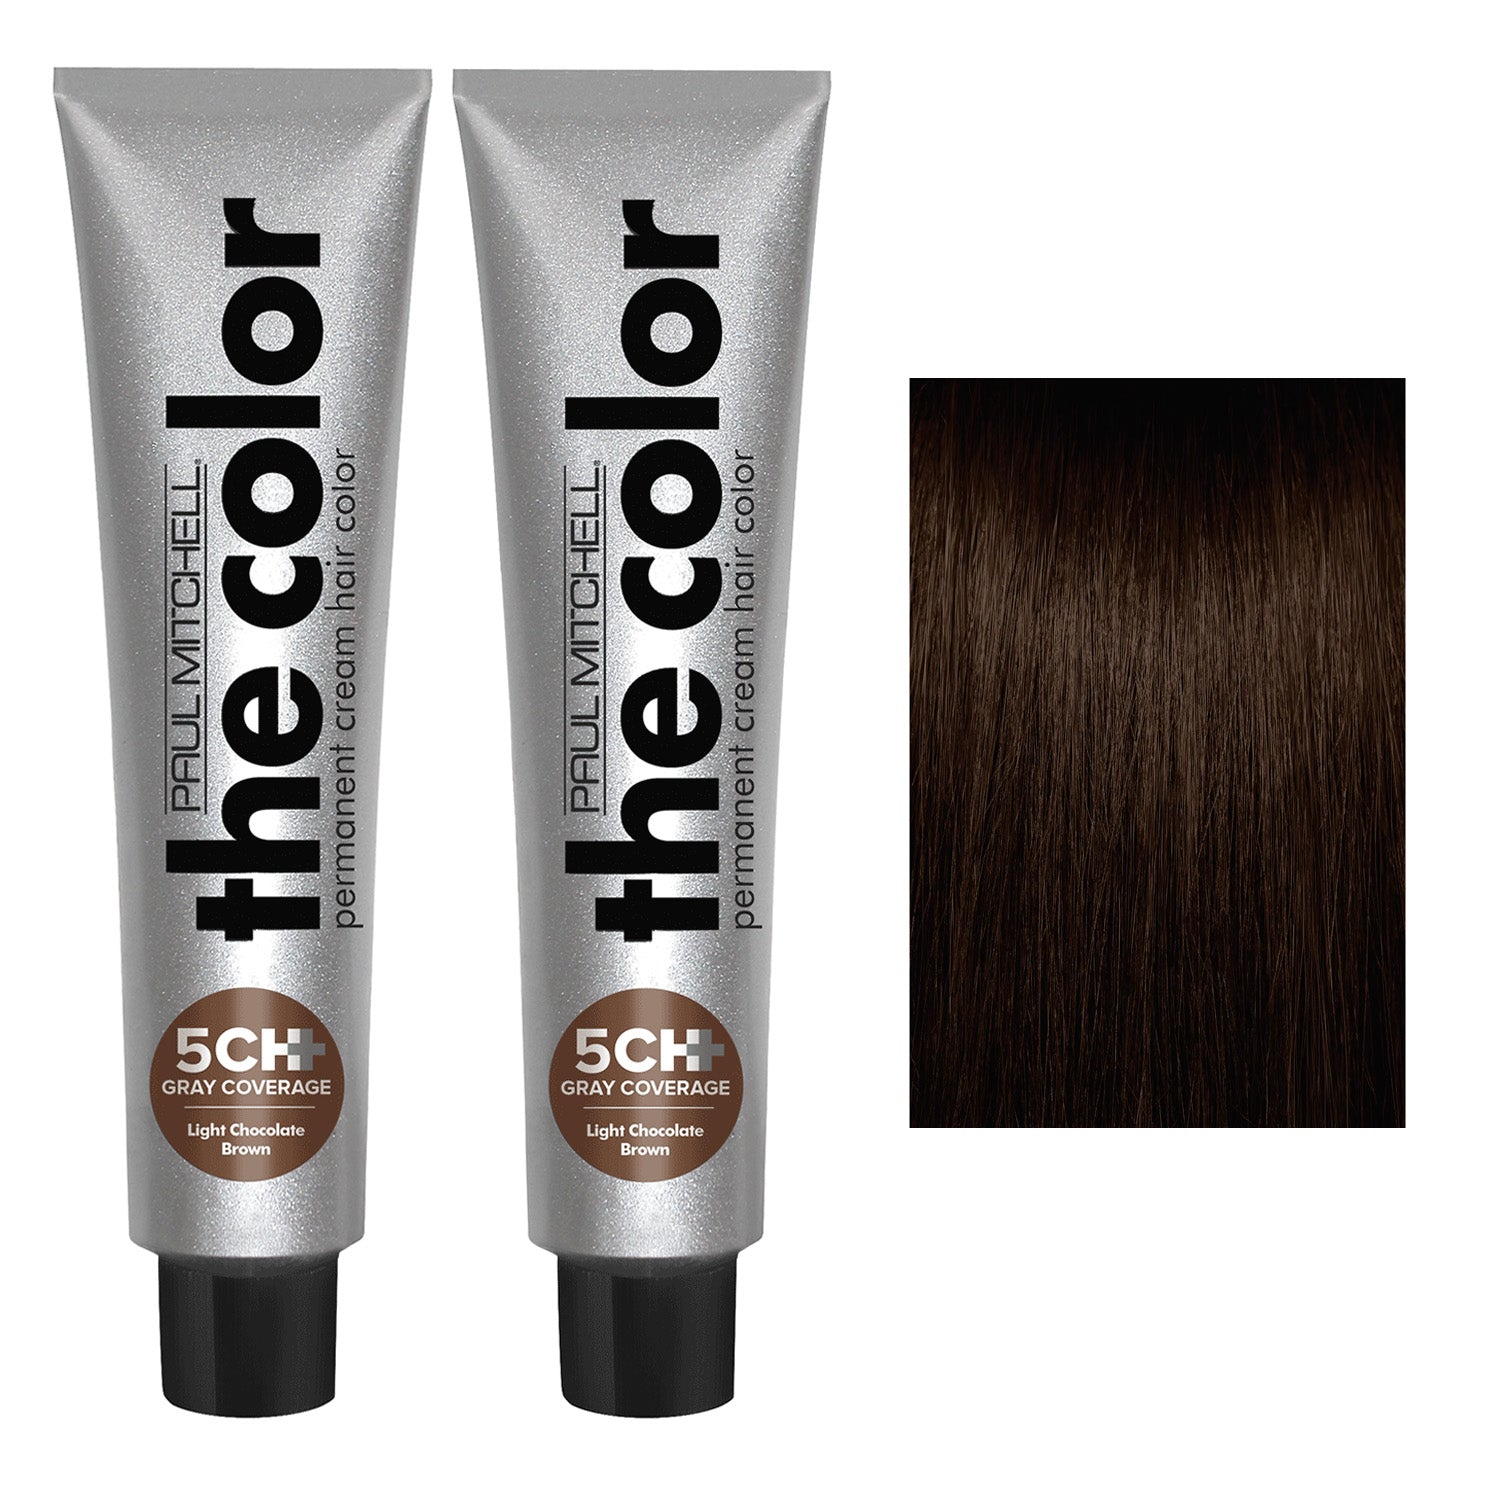 DUO SET Paul Mitchell the Color Gray Coverage 5CH+ 3oz